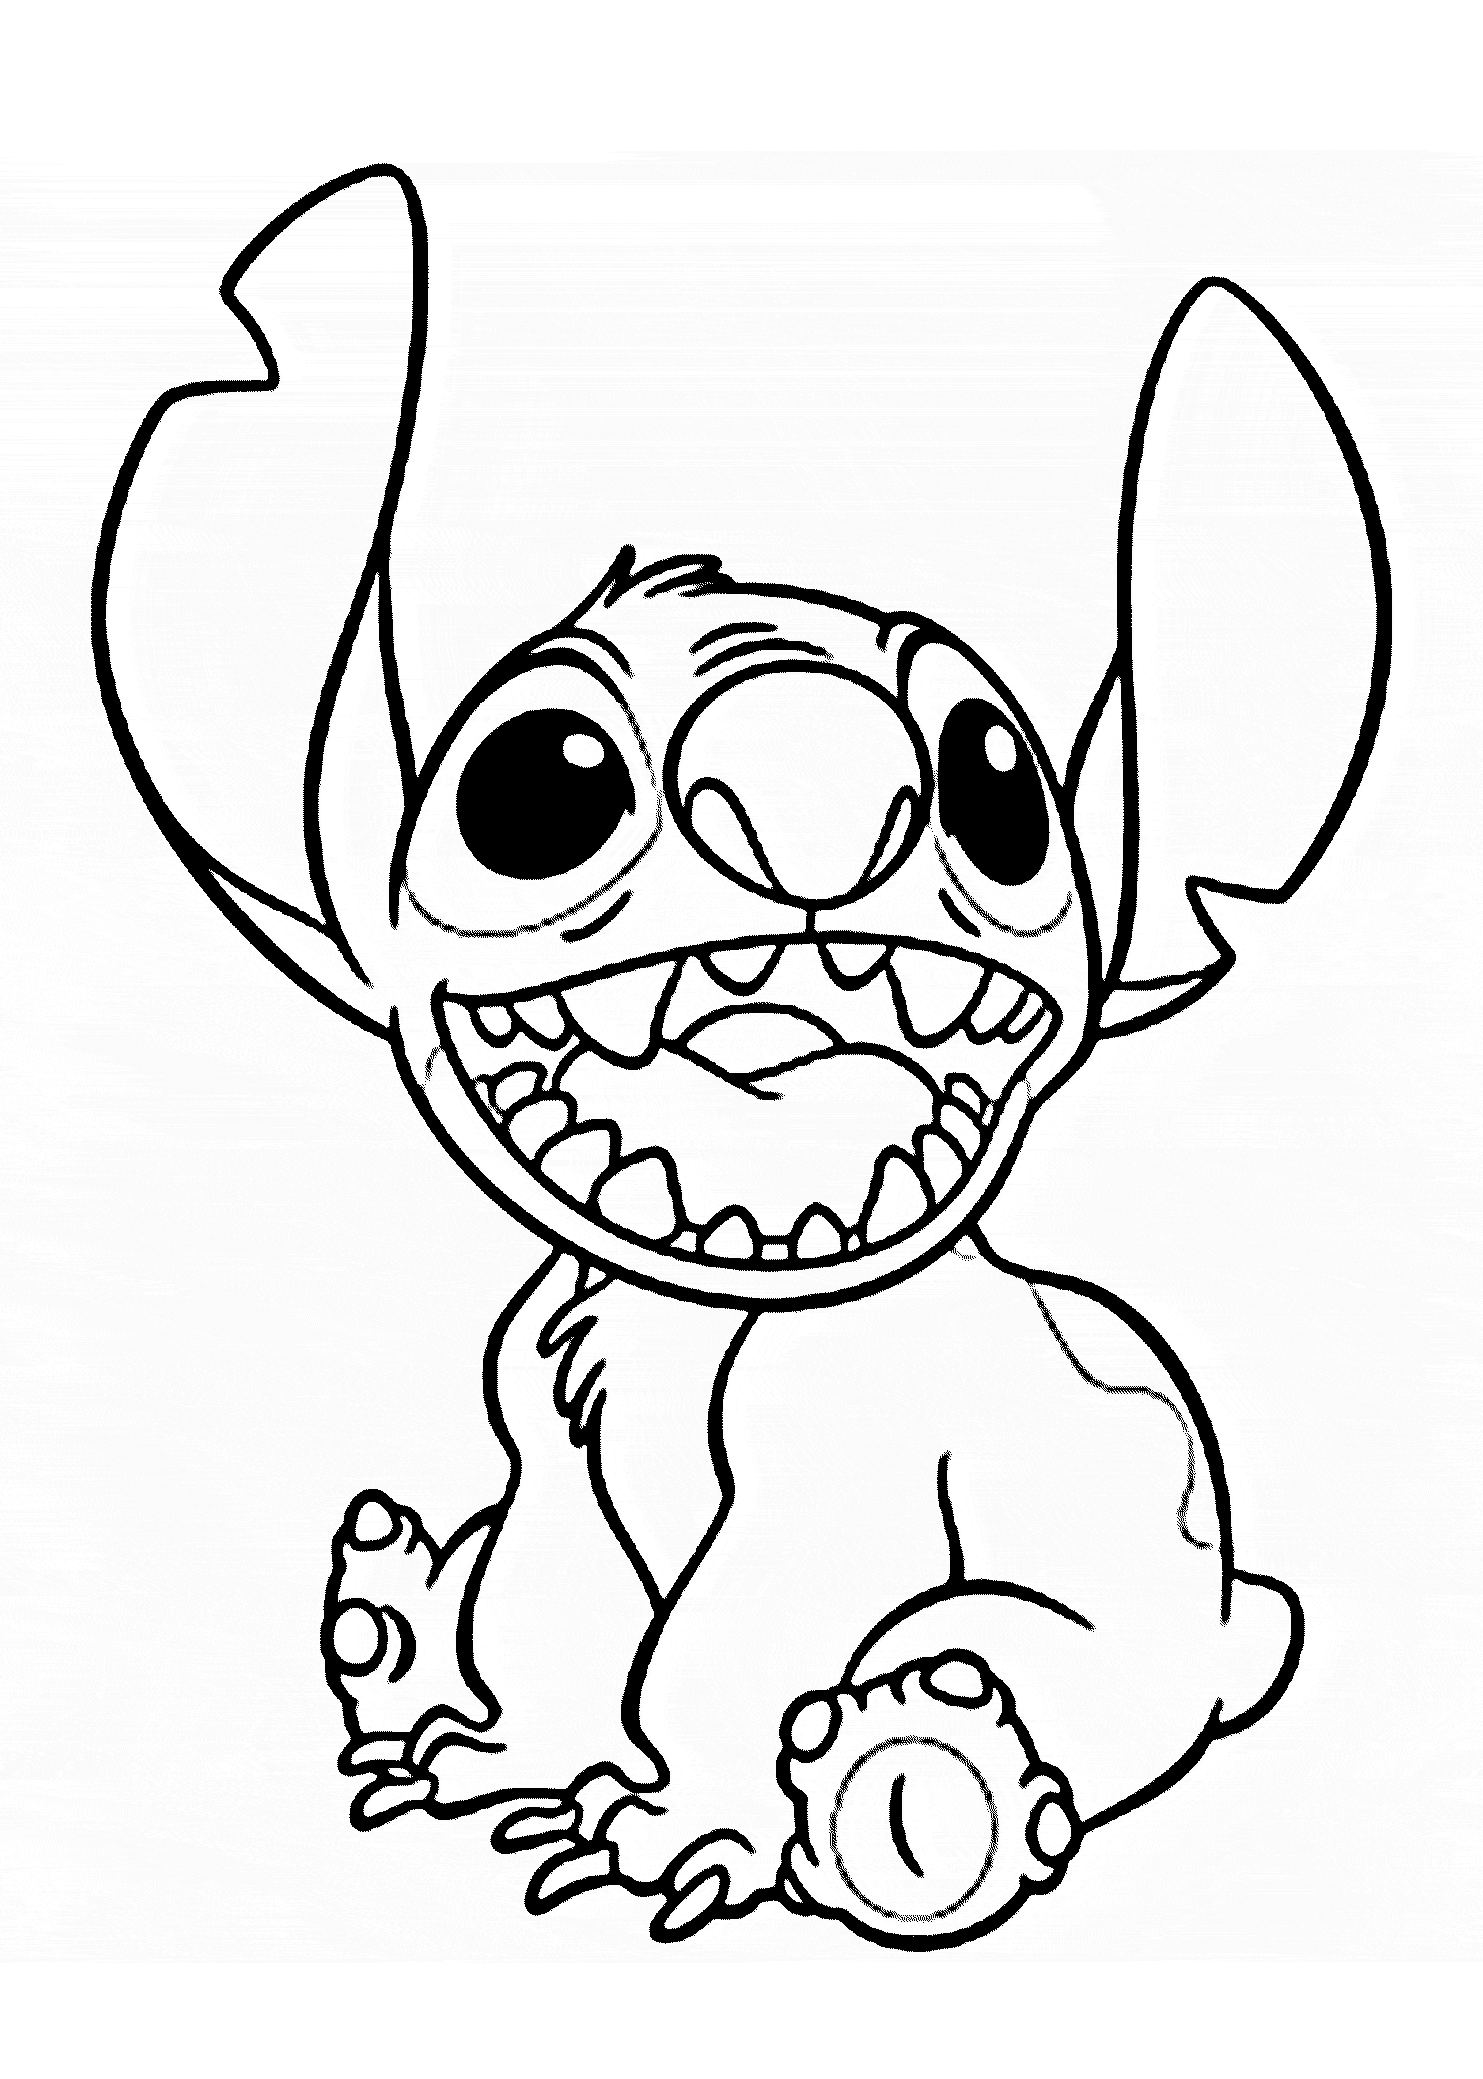 free coloring pages download lilo and stitch coloring pages to download and print for free download pages coloring free 